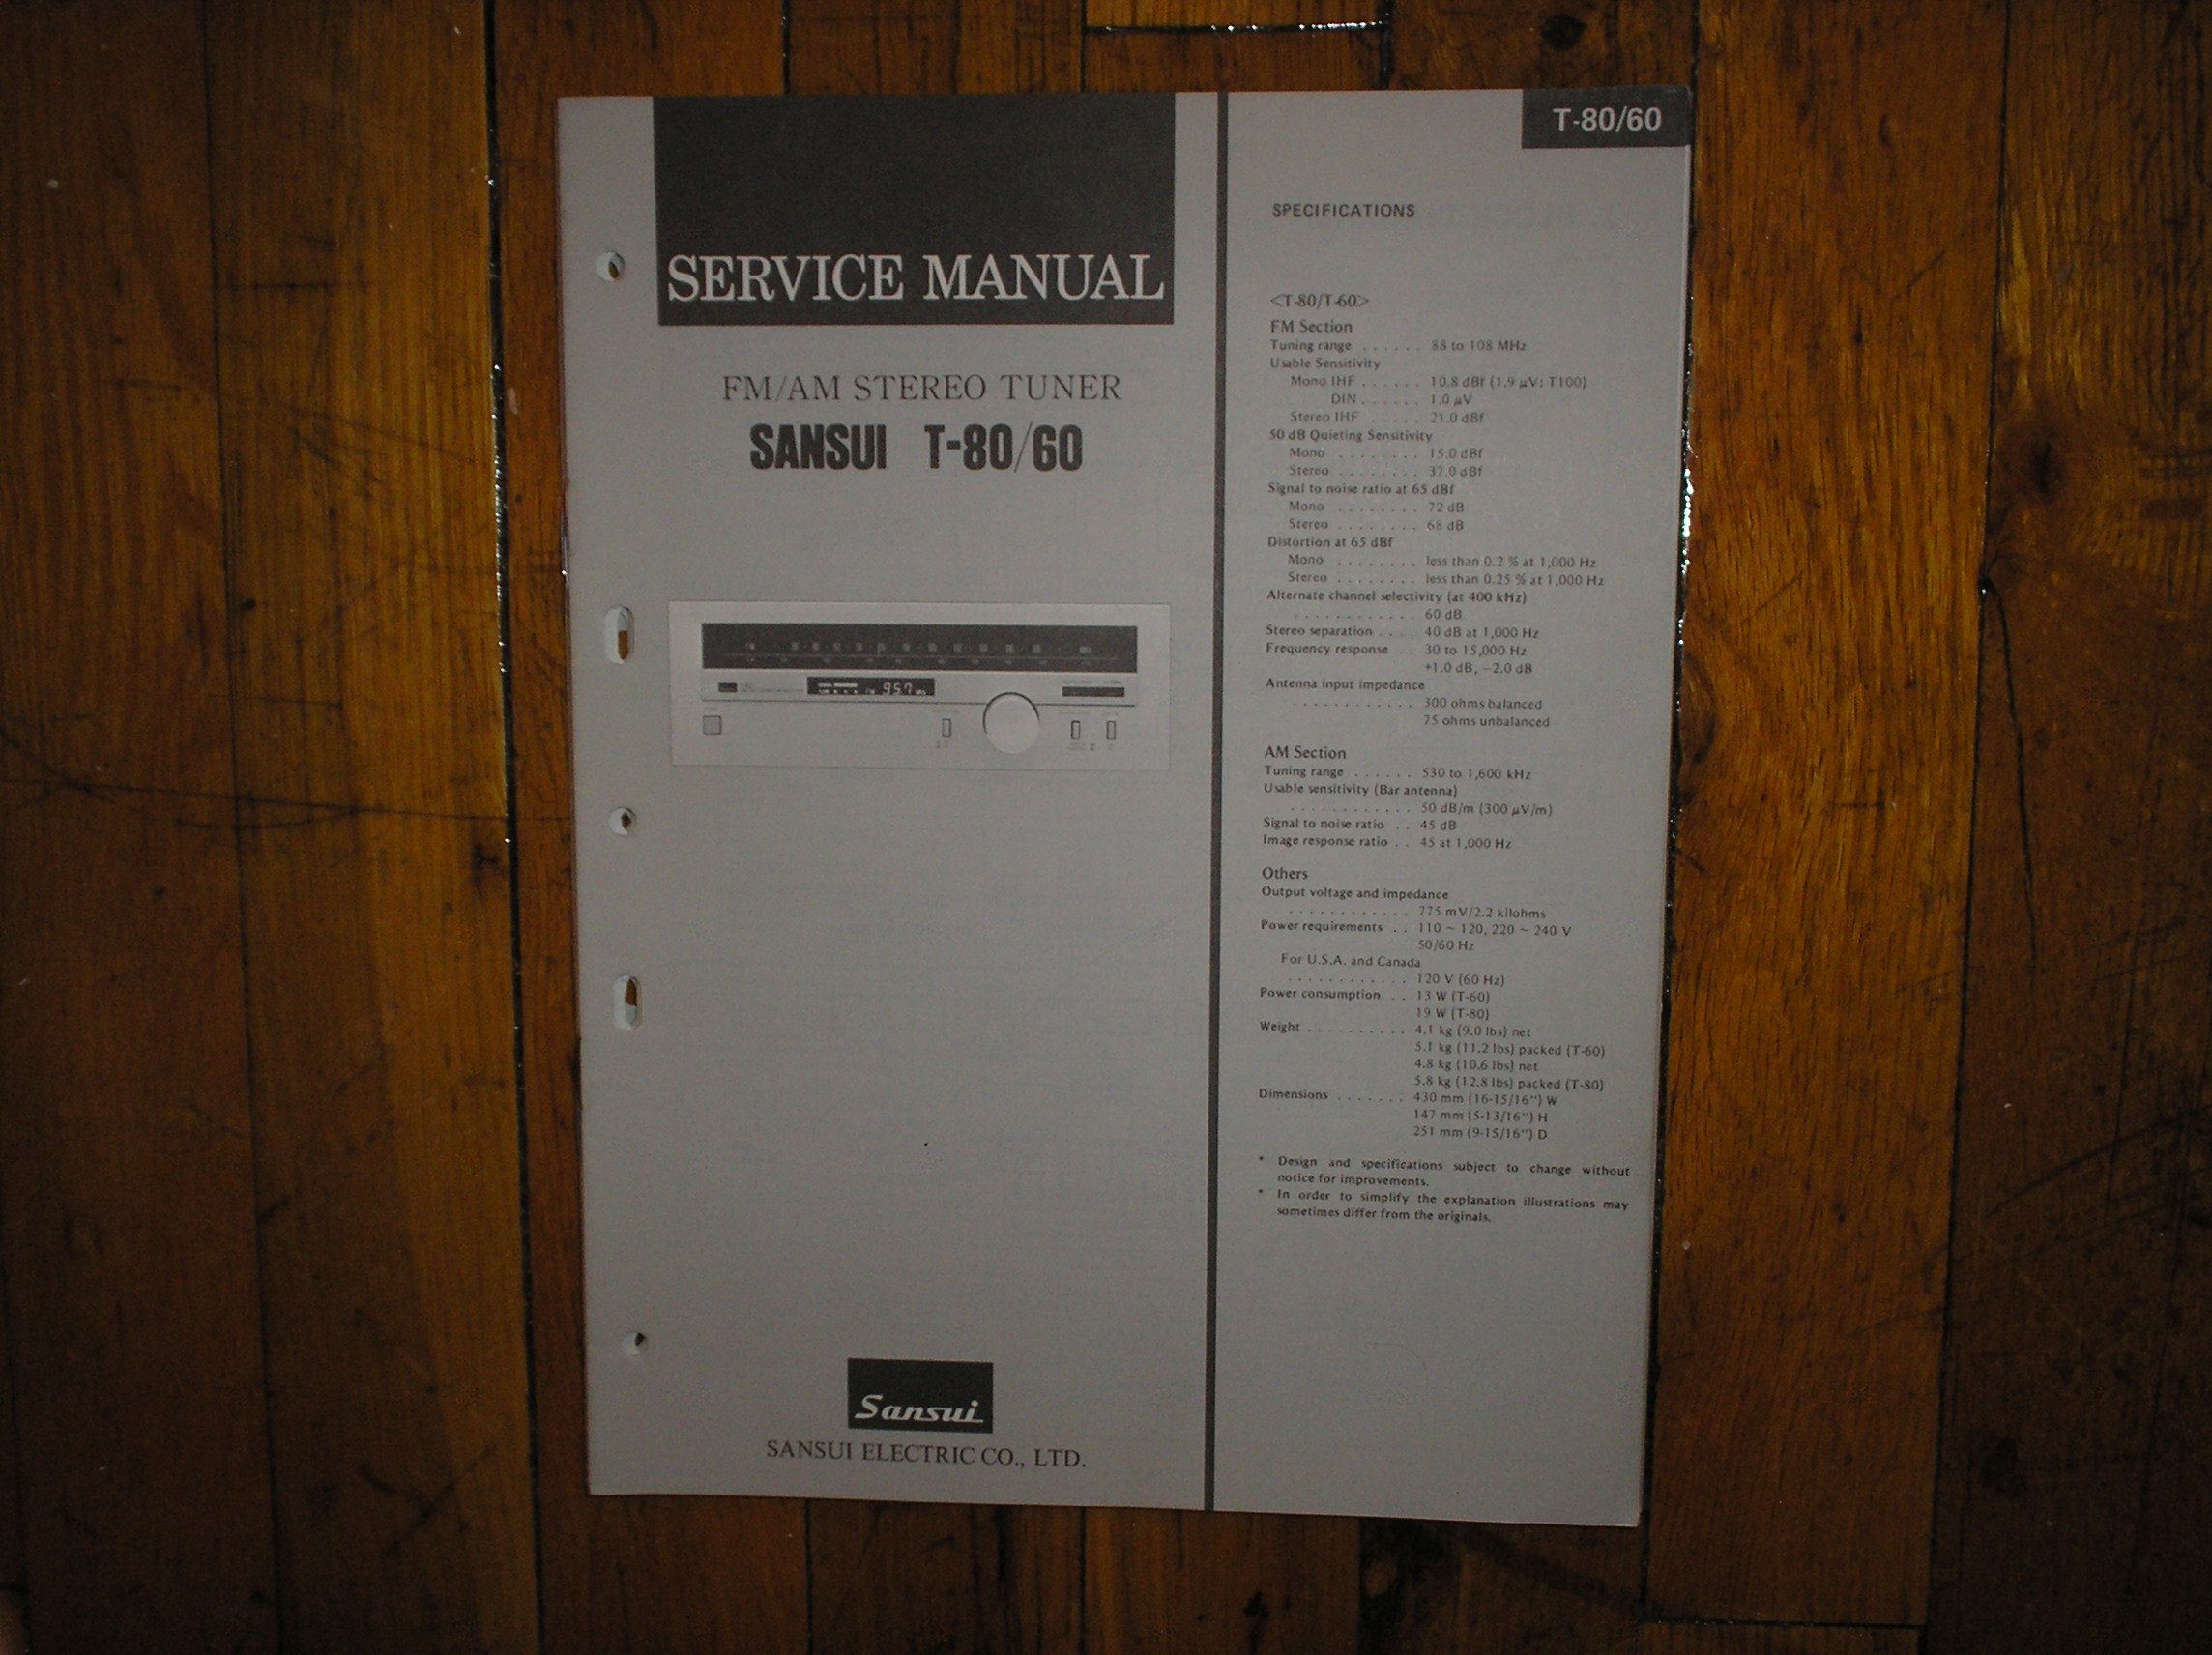 T-60 T-80 Tuner Service Manual